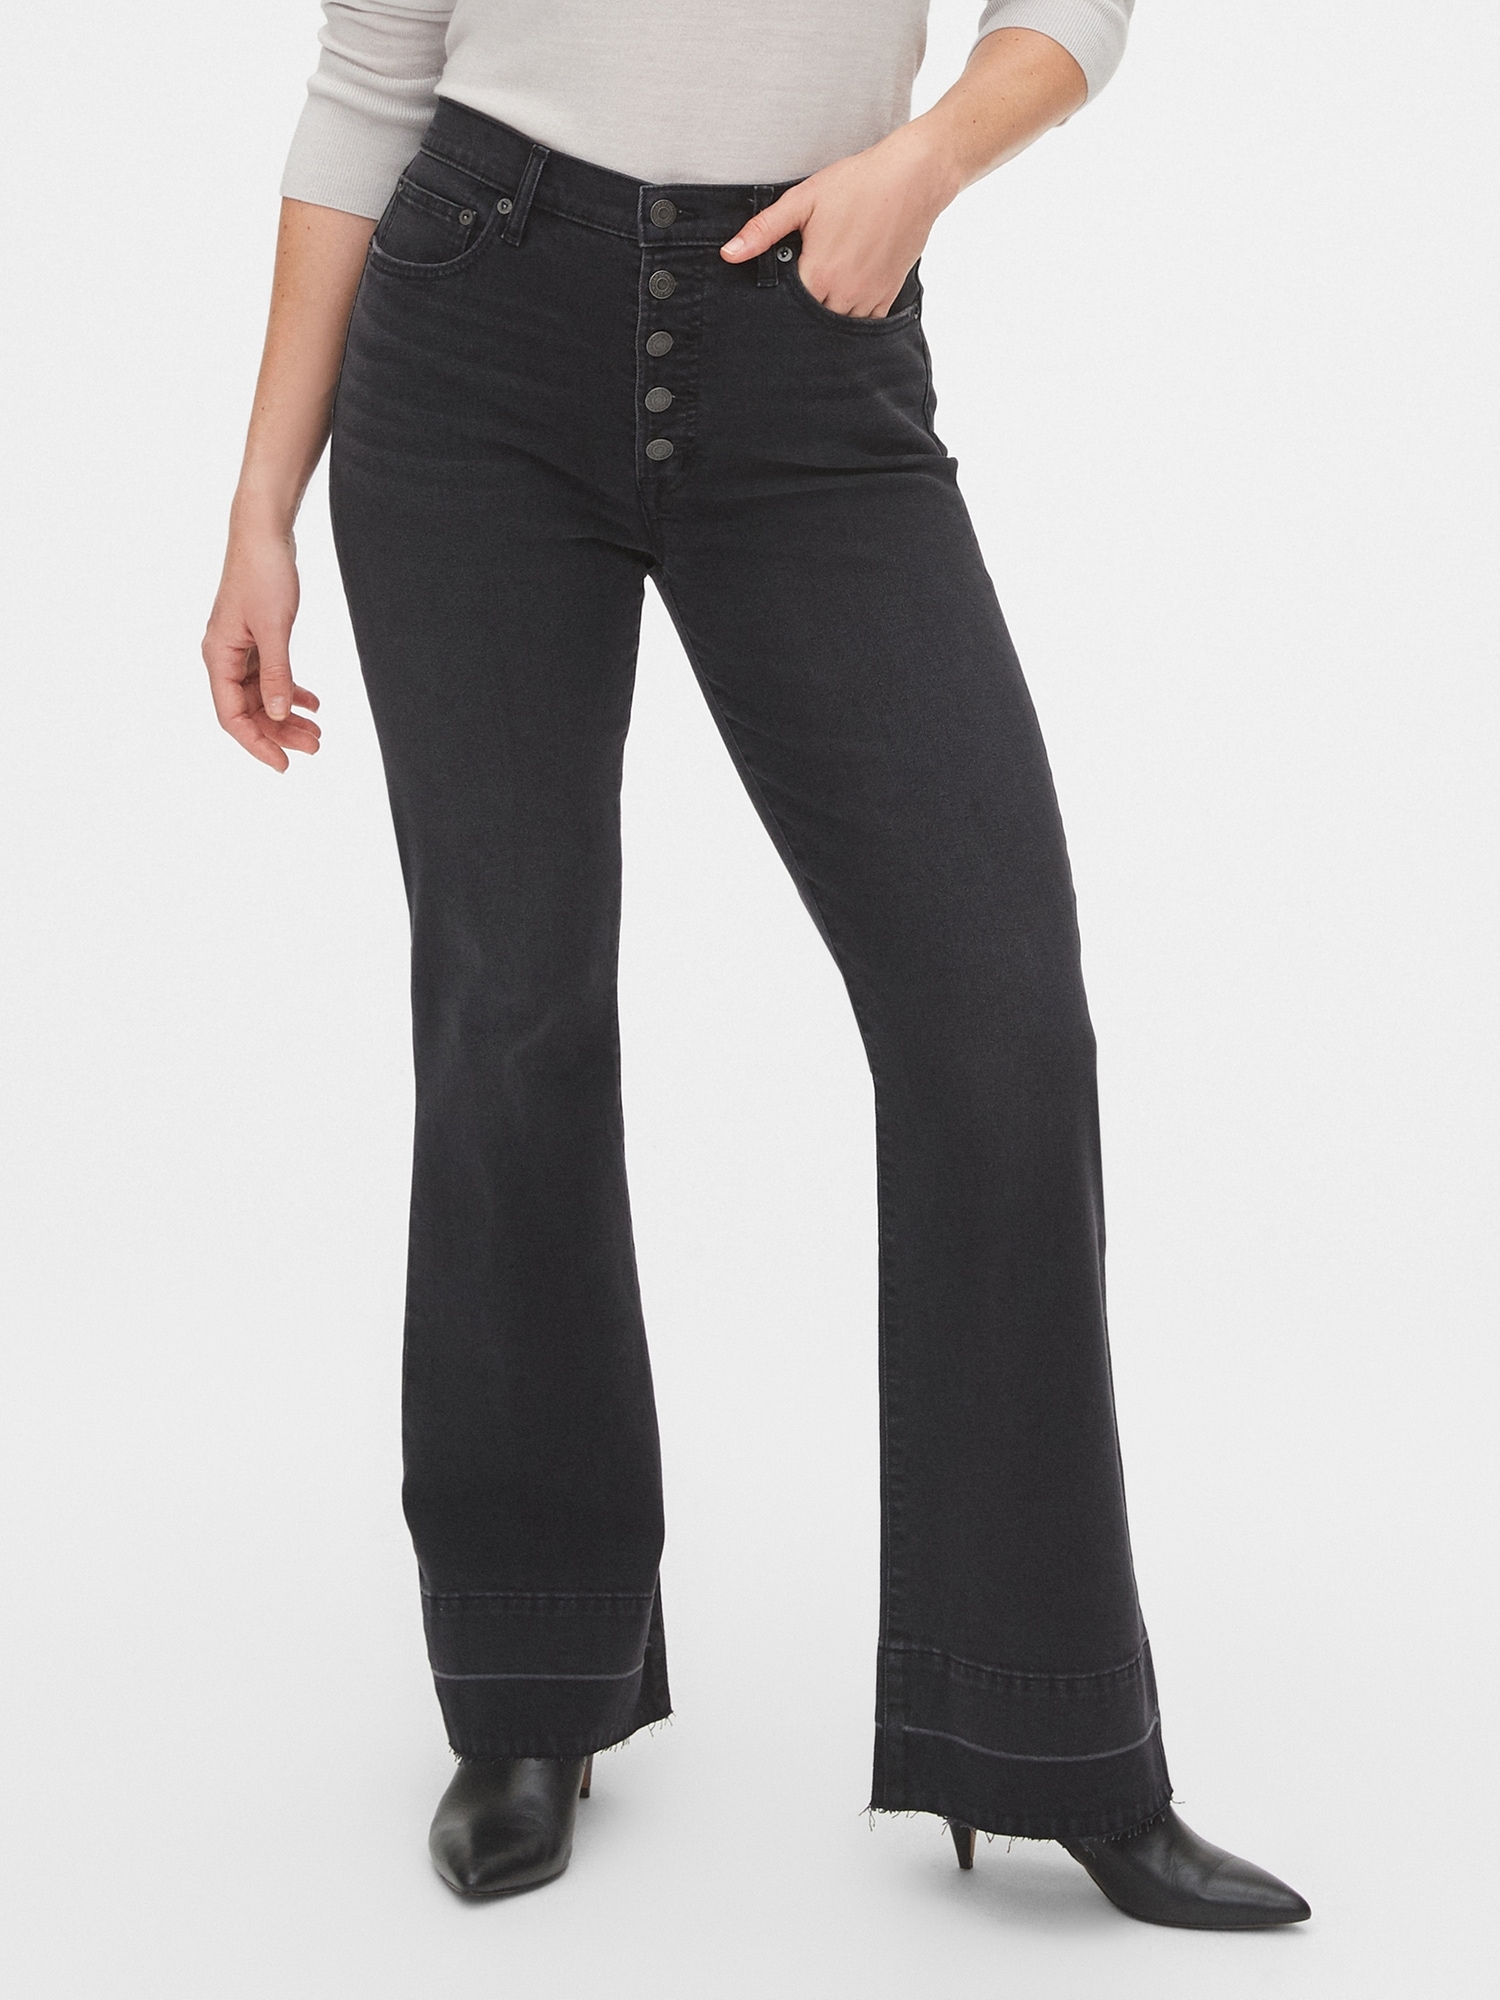 high waisted black jeans with buttons